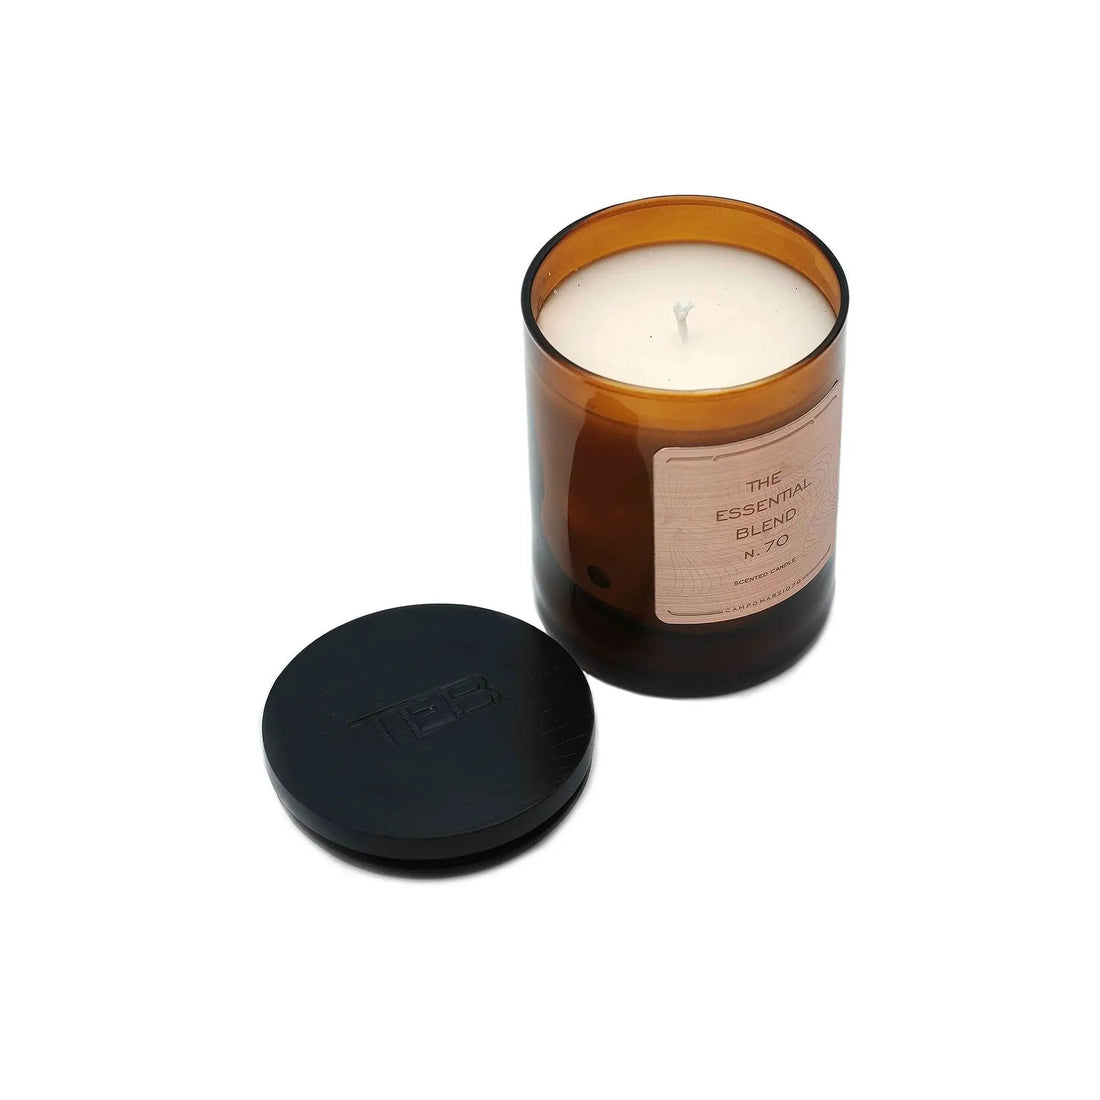 Candle N.70 The Essential Blend 250gr